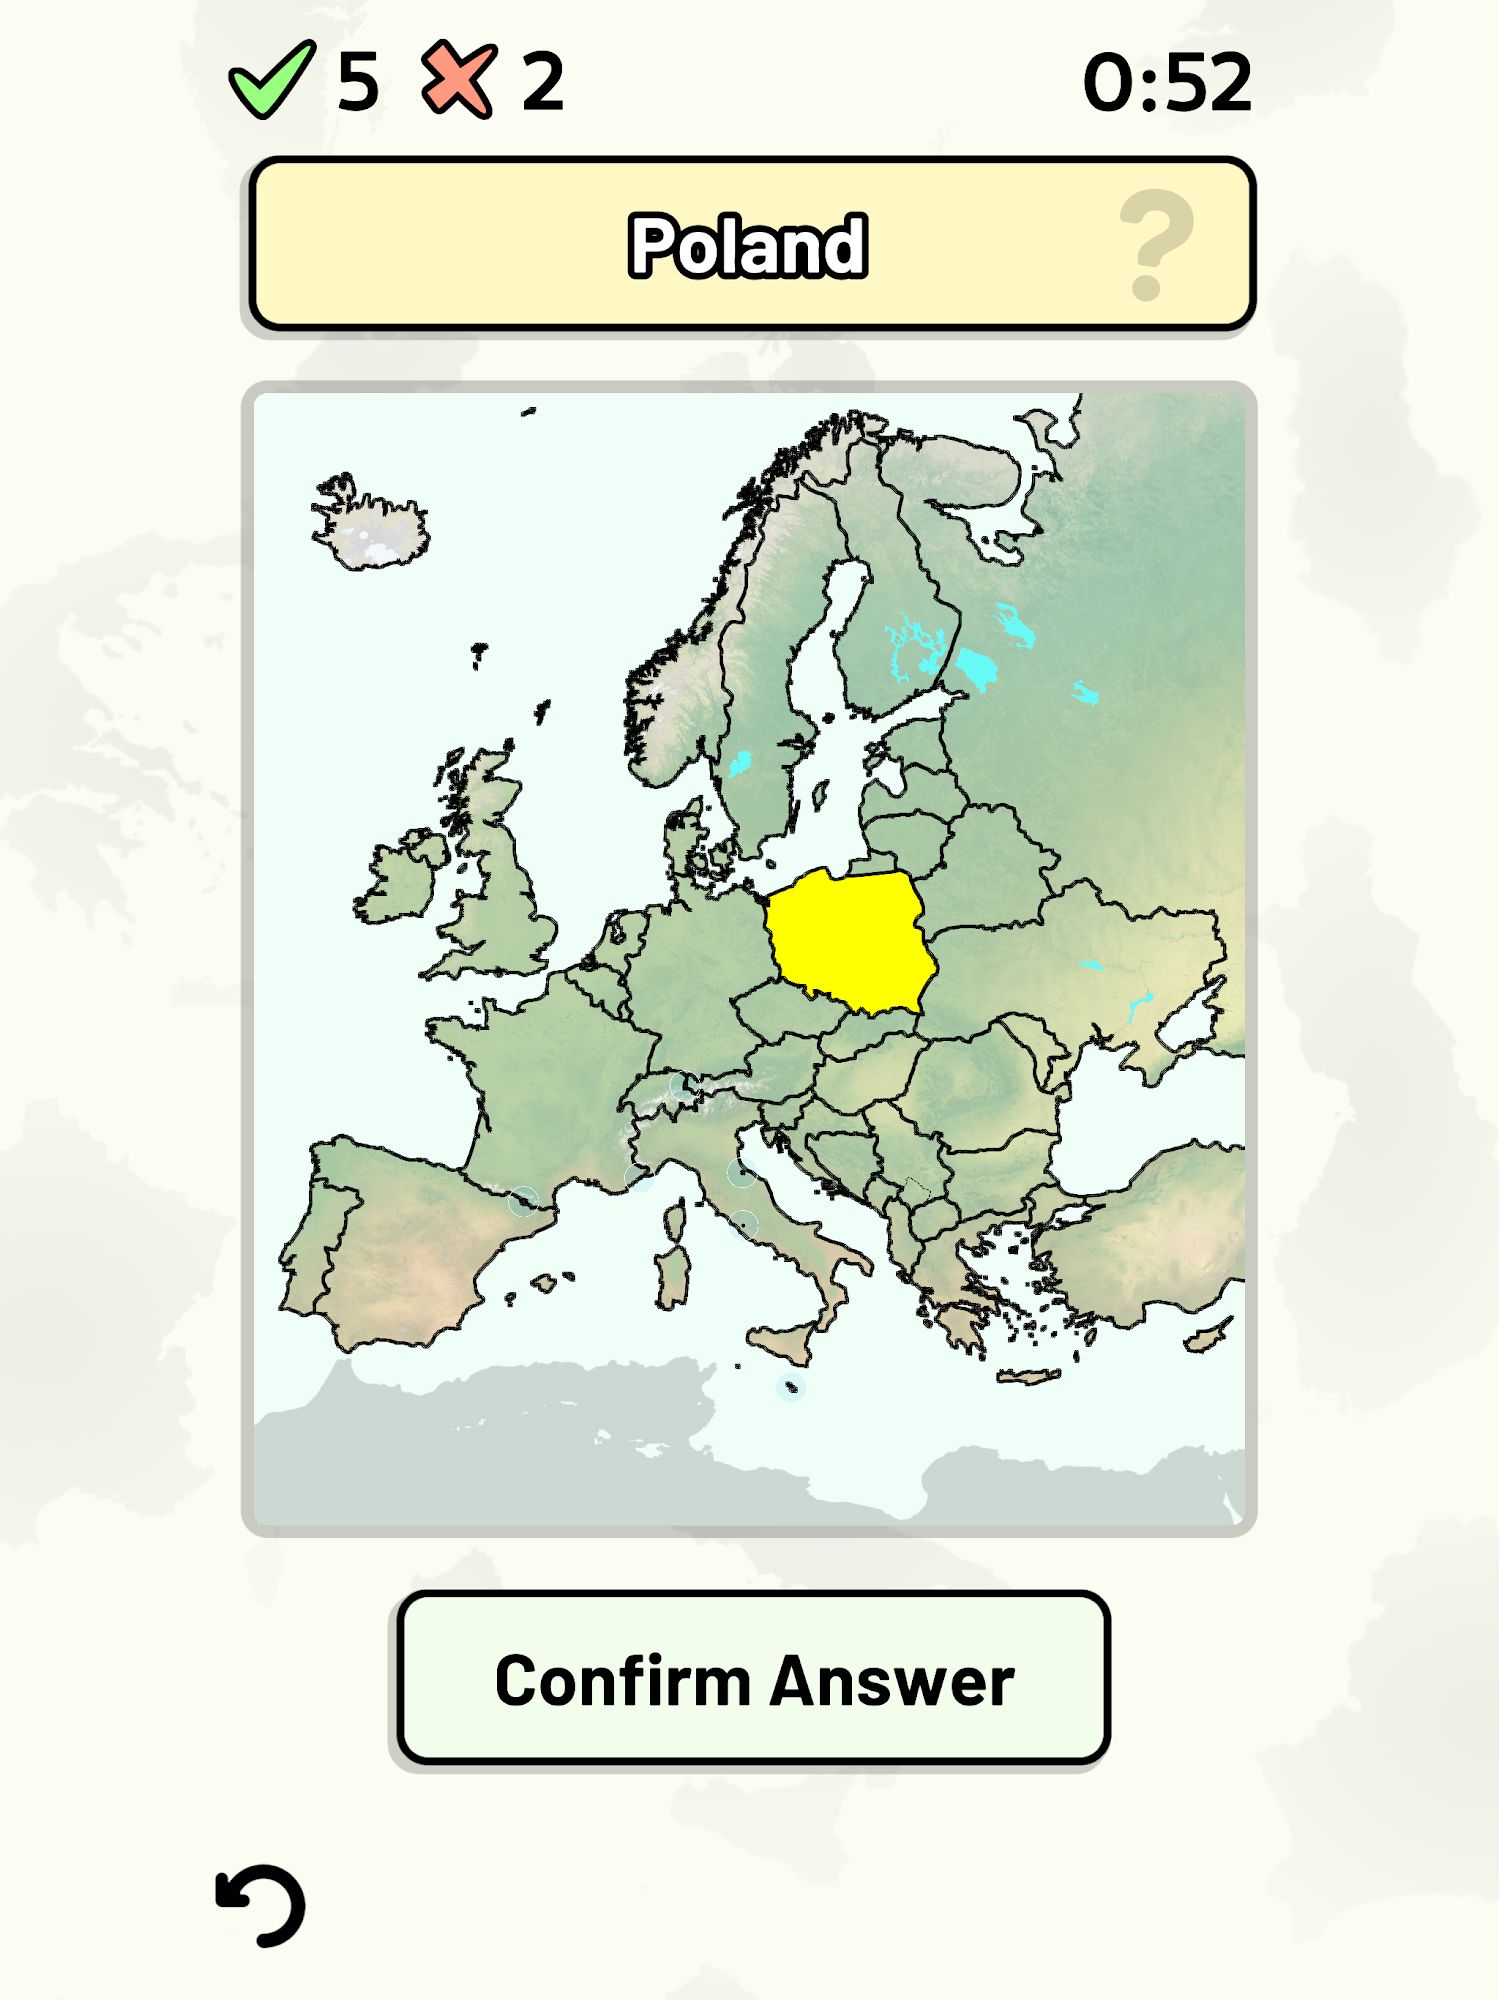 Countries of Europe Quiz - Maps, Capitals, Flags скріншот 1